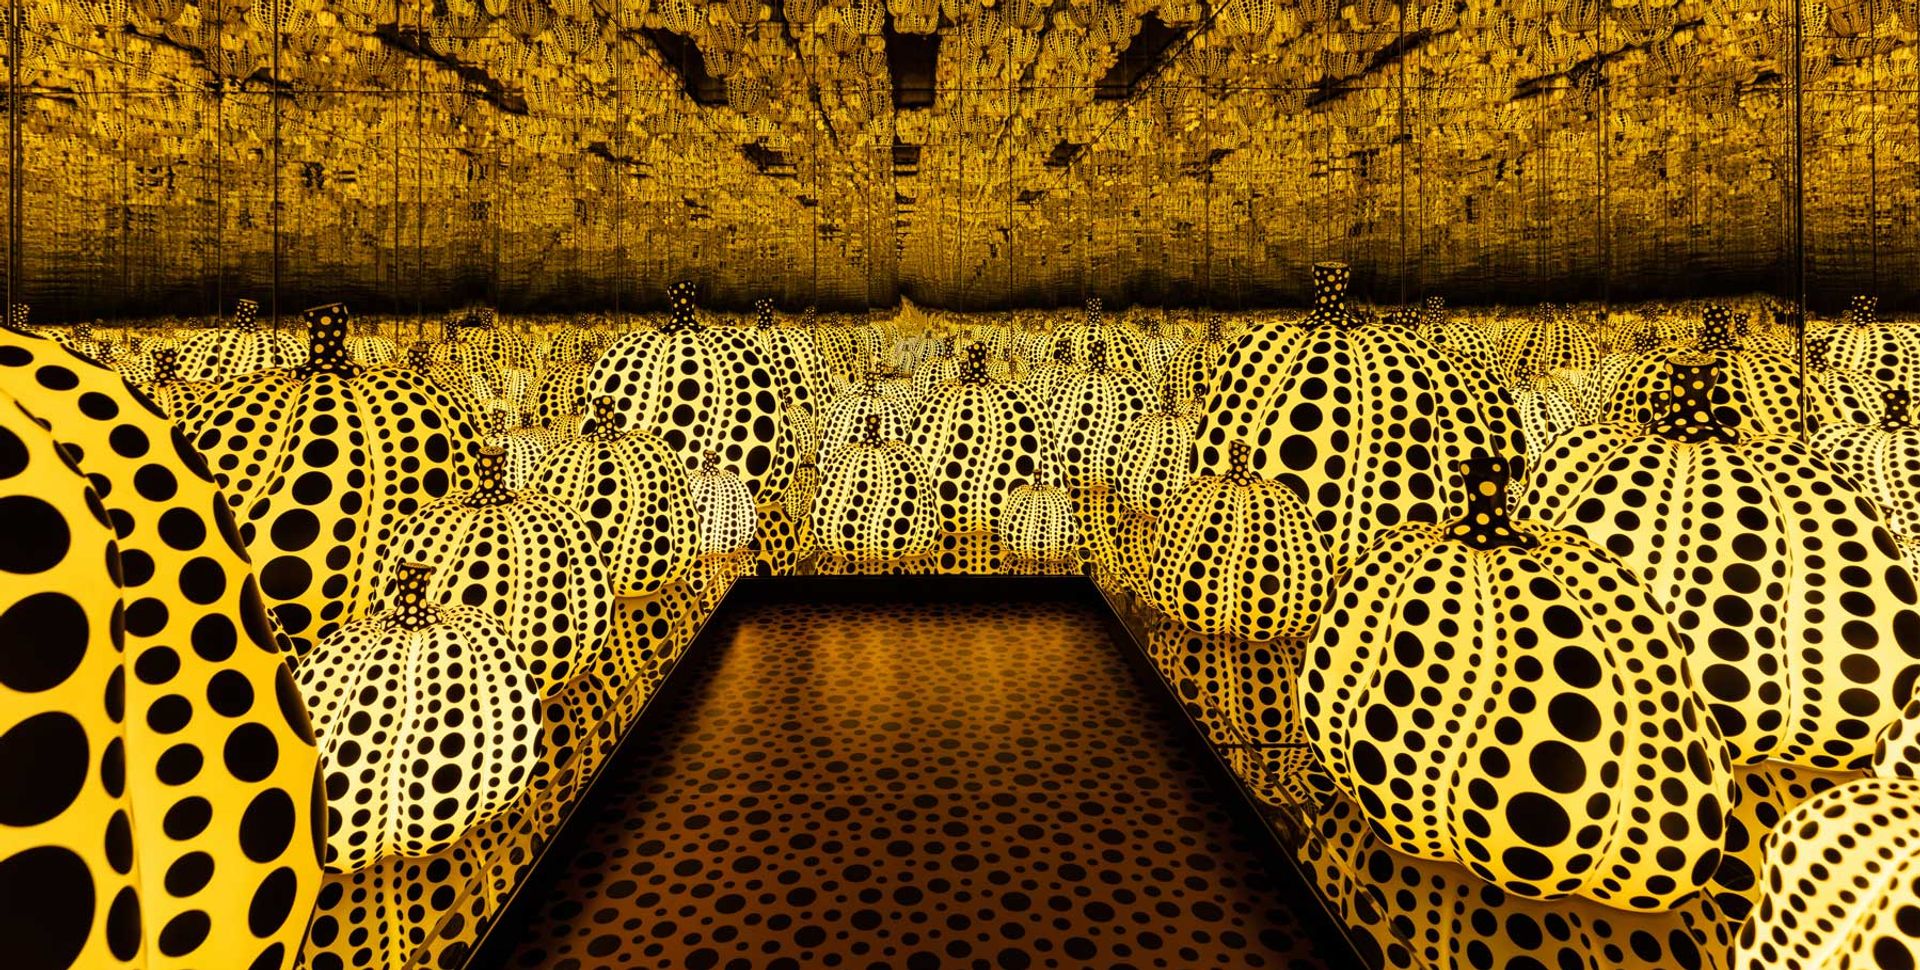 Yayoi Kusama’s All the Eternal Love I Have for the Pumpkins (2016) at the ICA Miami Pop-up in the Design District (until 31 January 2020) Yayoi Kusama’s All the Eternal Love I Have for the Pumpkins (2016) at the ICA Miami Pop-up in the Design District (until 31 January 2020). Photo: Silvia Ros; © Yayoi Kusama